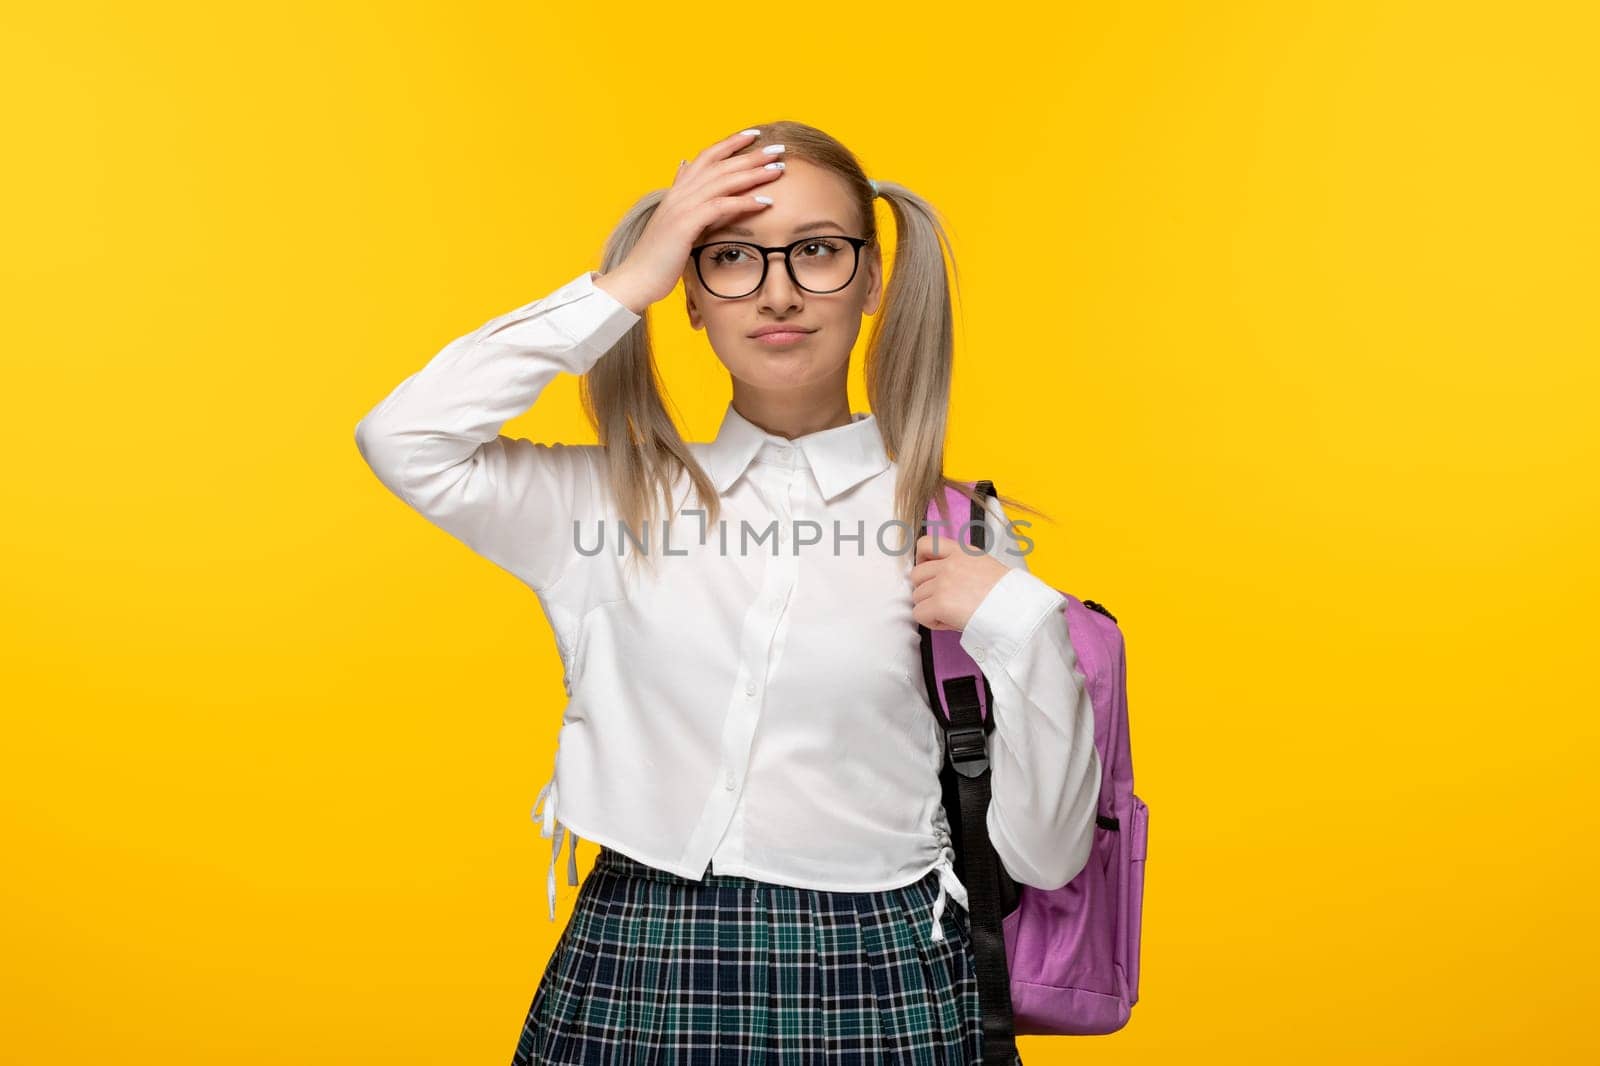 world book day blonde girl touching forehead with backpack on yellow background